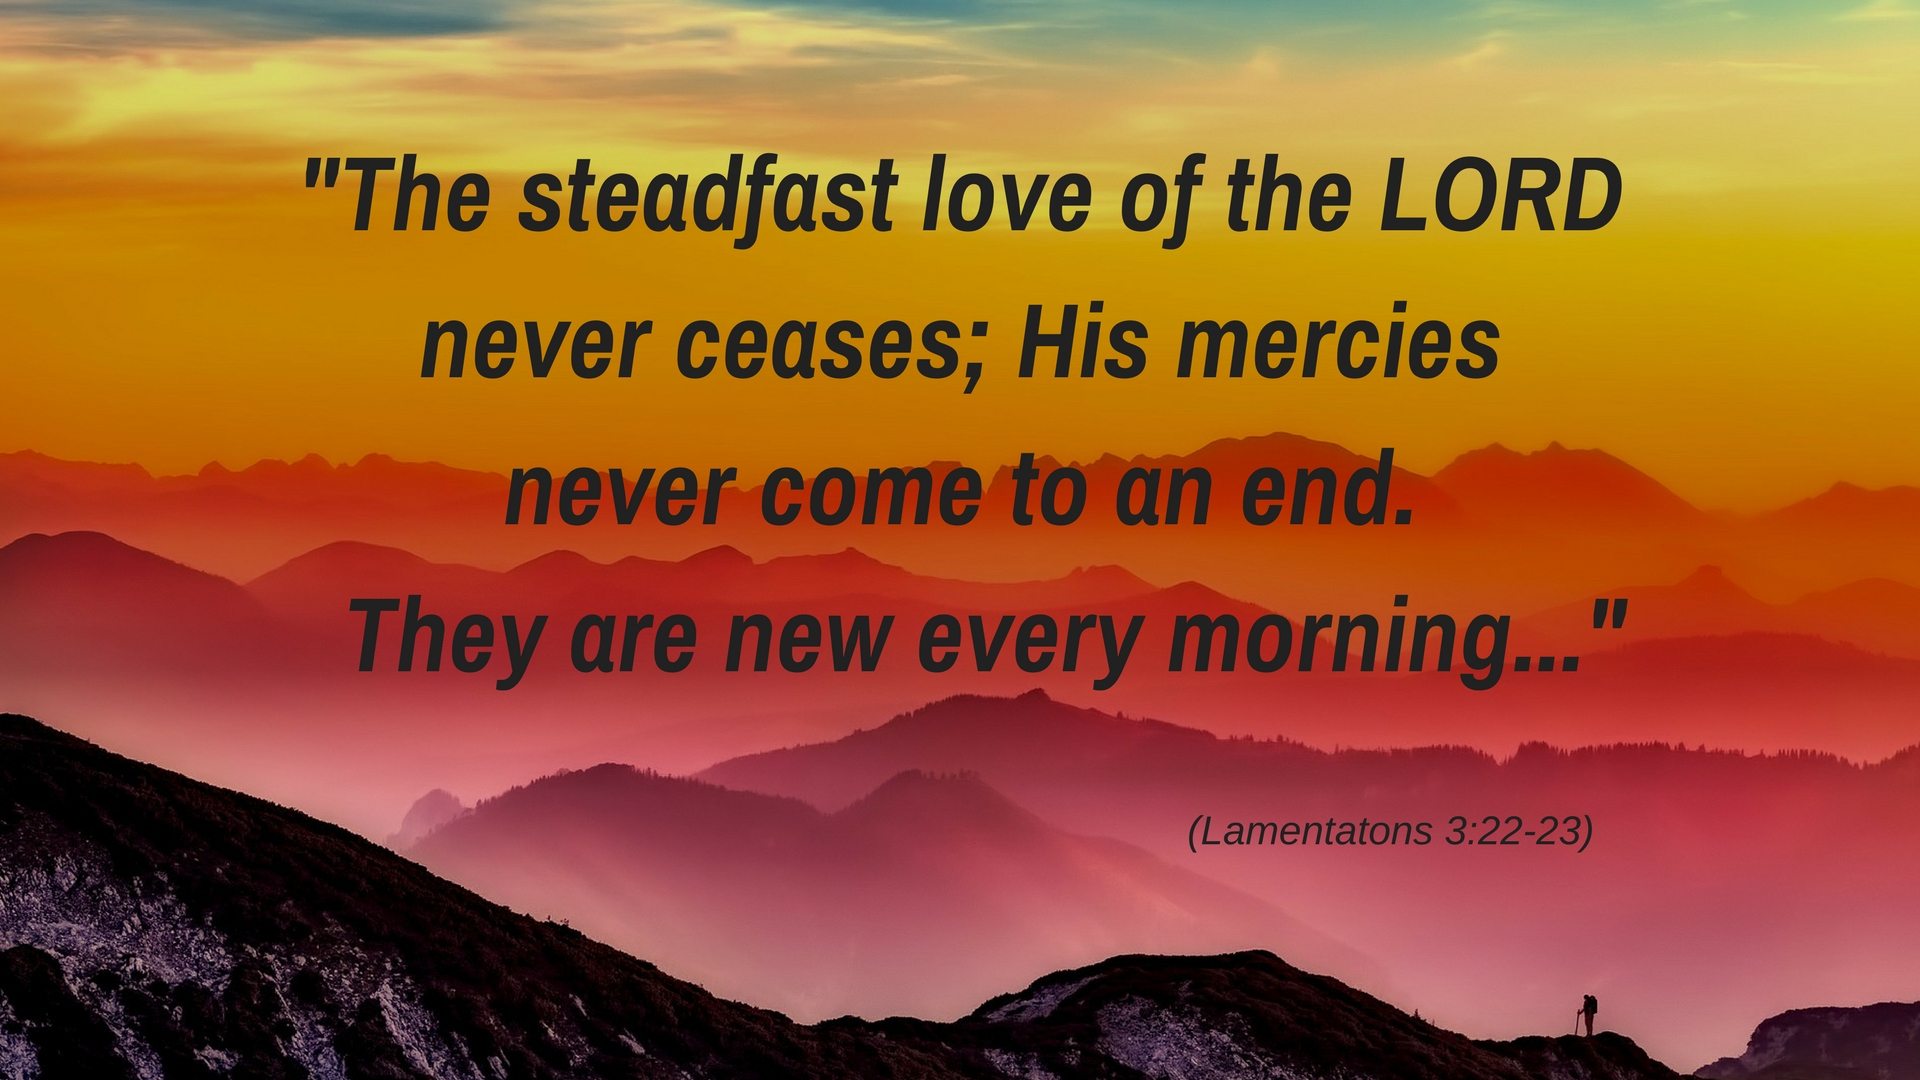 Steadfast Love in Marriage - MM #296 - Marriage Missions International